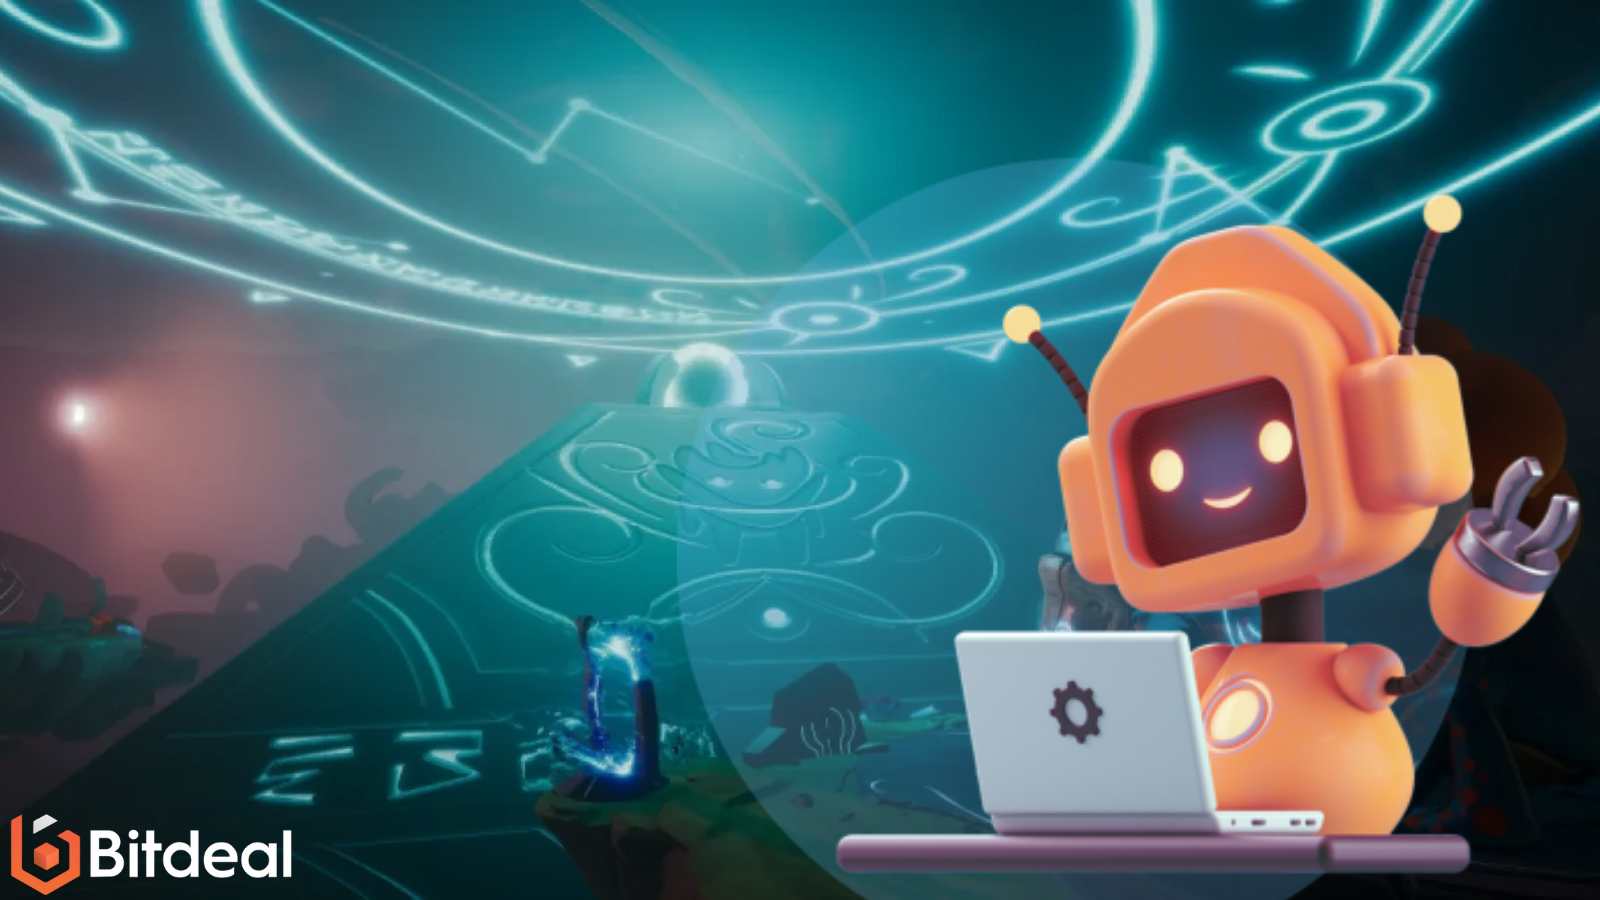 Article about Top 5 AI Development Services To Look in 2023